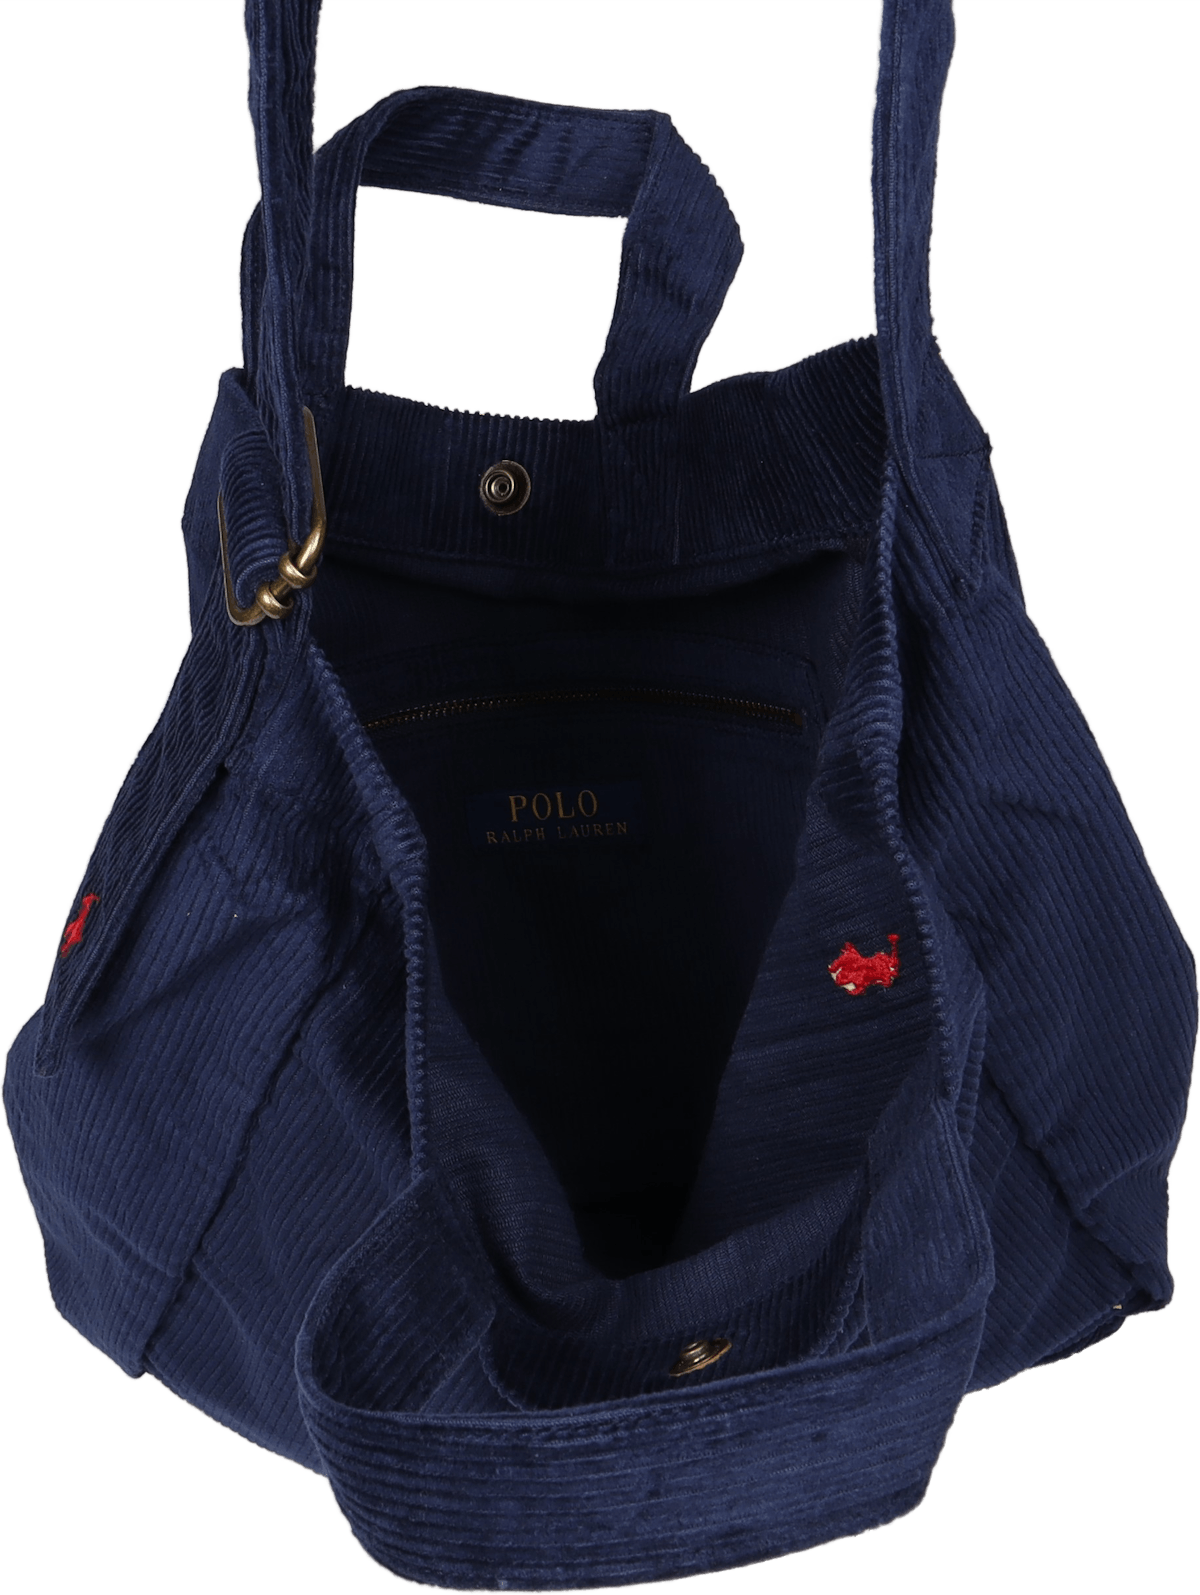 Tote-tote-large Newport Navy